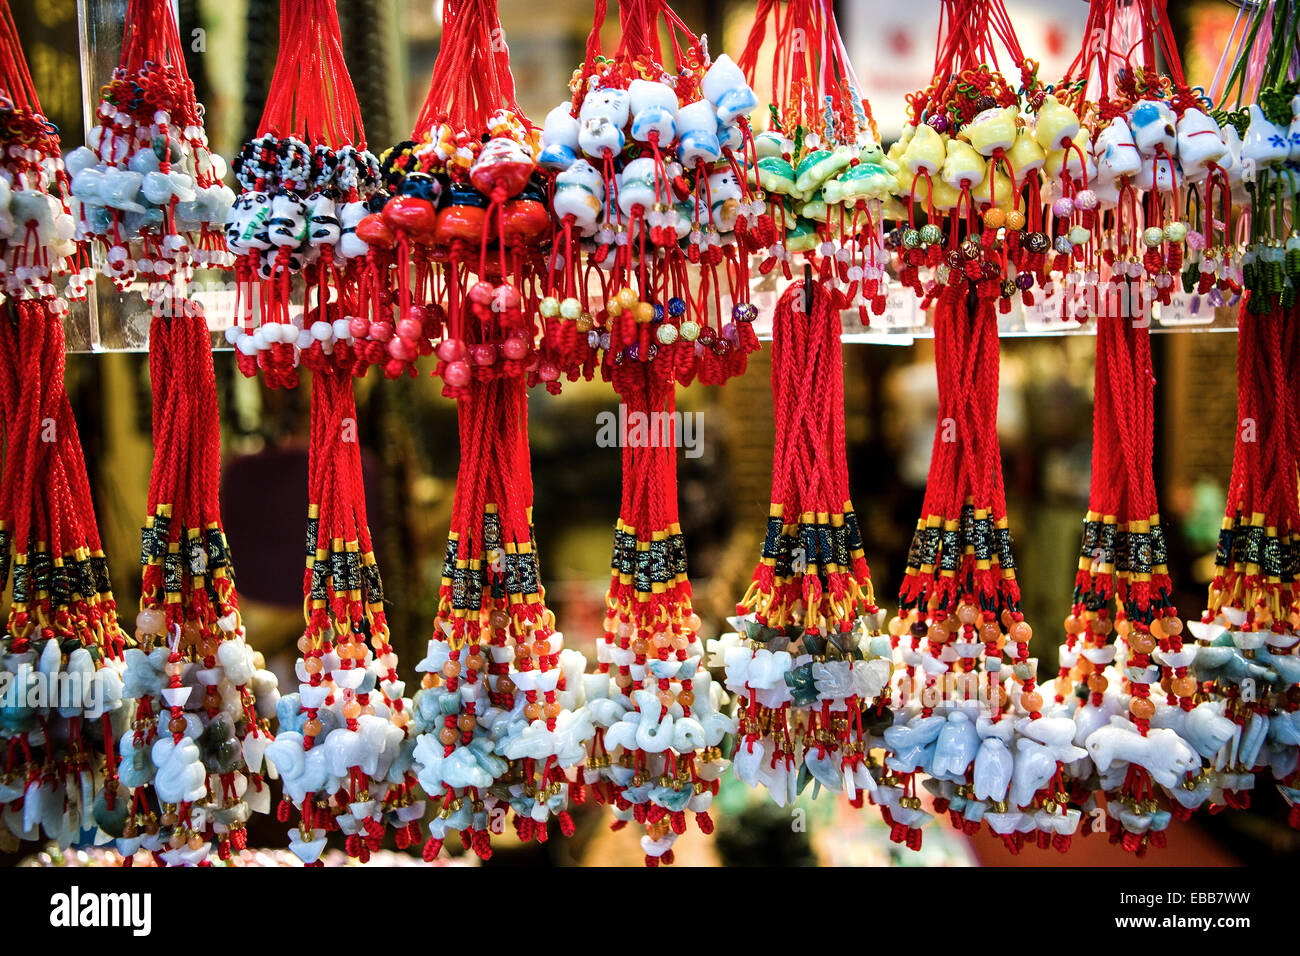 Hong Kong,  traditional decorations in the flea market near Hollywood road. Stock Photo